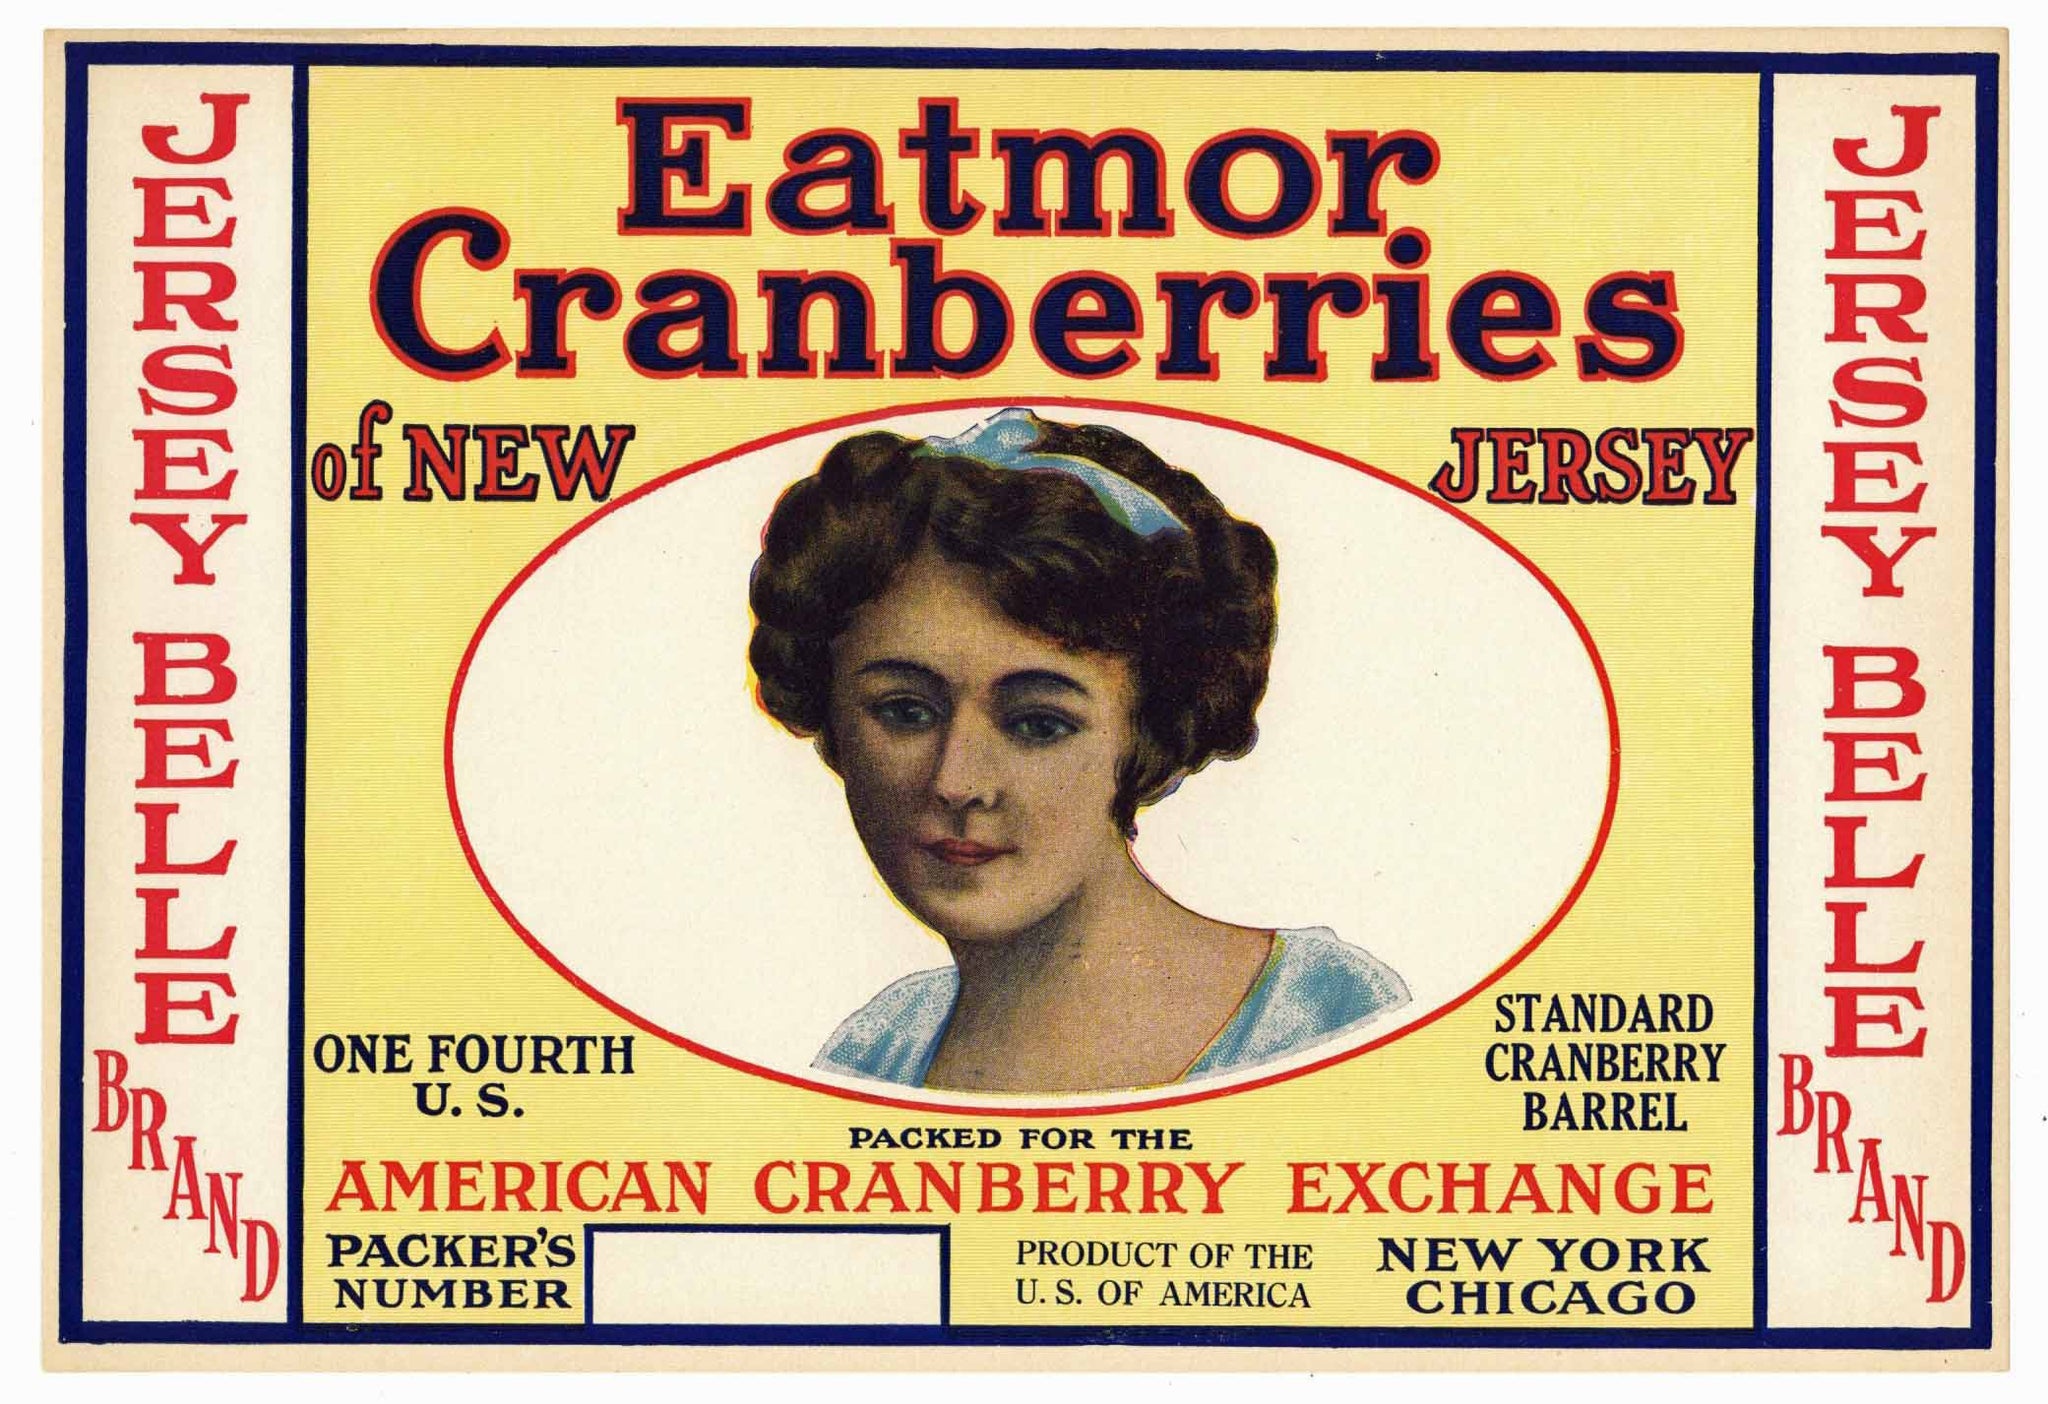 Jersey Belle Brand Vintage New Jersey Cranberry Crate Label, 1/4